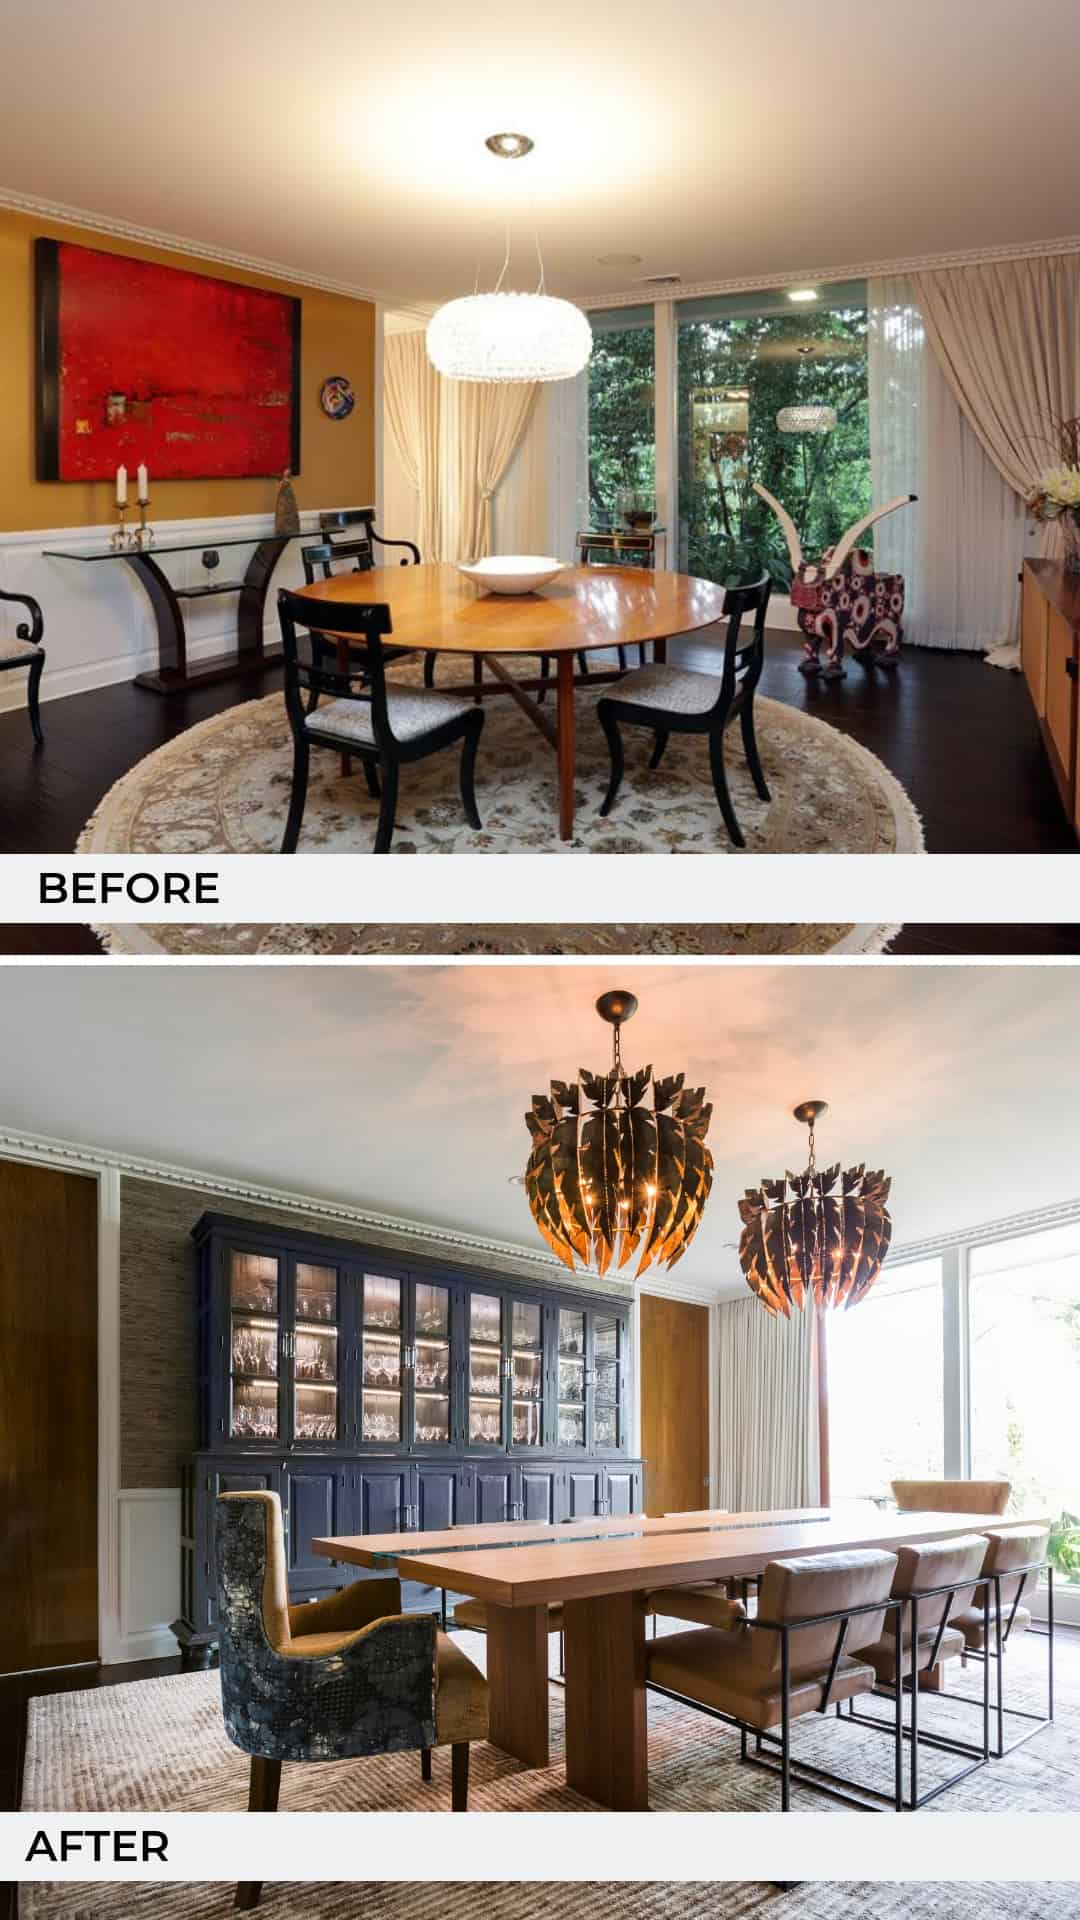 A 1950s home, the dining room restored - Before and After